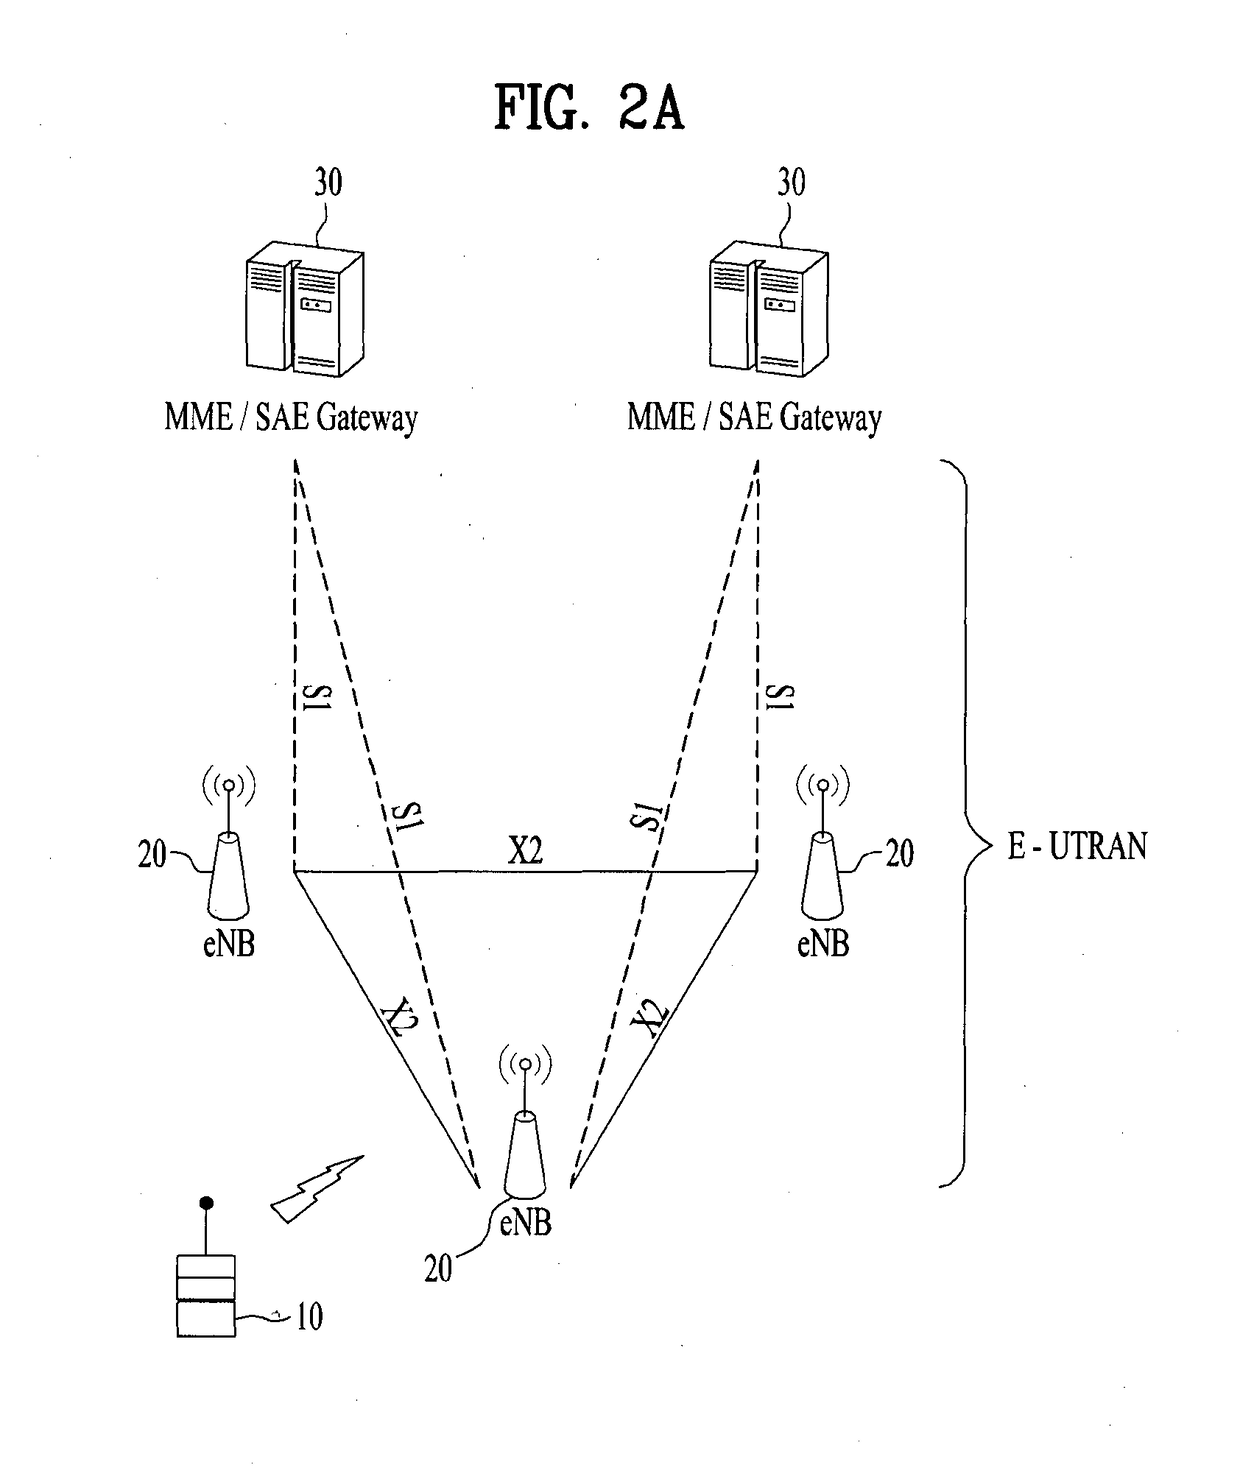 Method for establishing layer-2 entities for d2d communication system and device therefor